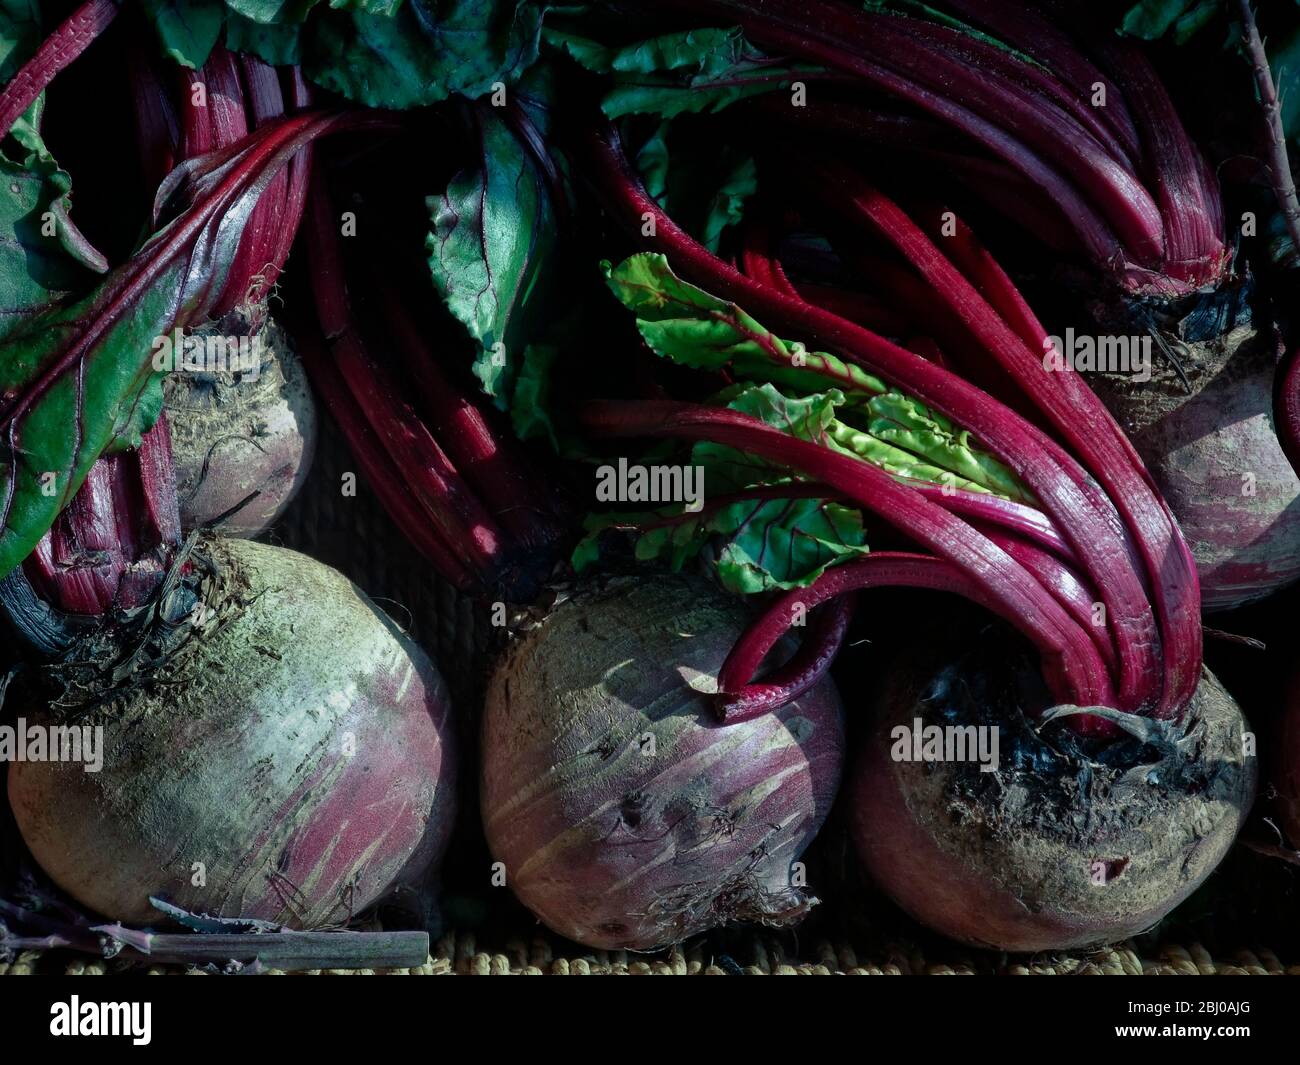 Fresh whole raw beetroot for sale in box outside traditional greengrocers shop - Stock Photo